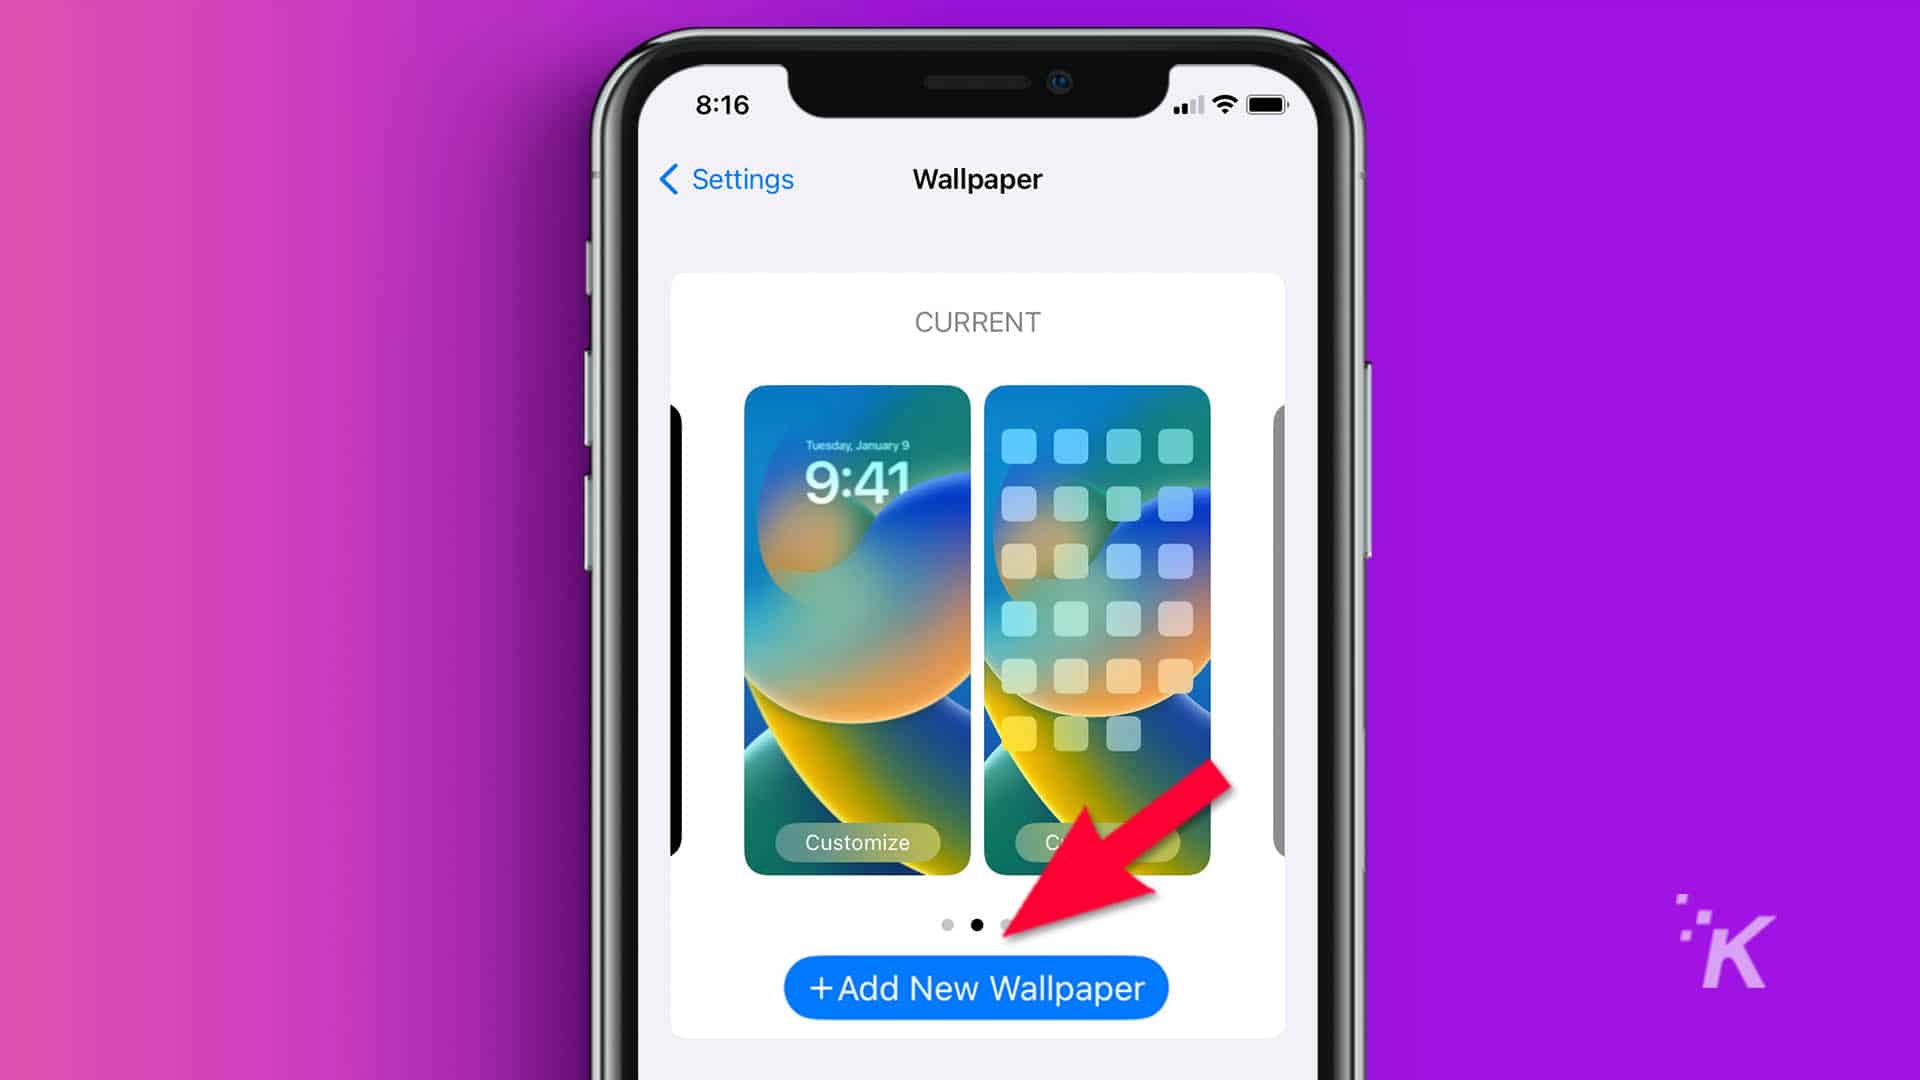 Arrow pointing to Add New Wallpaper Tab in iPhone